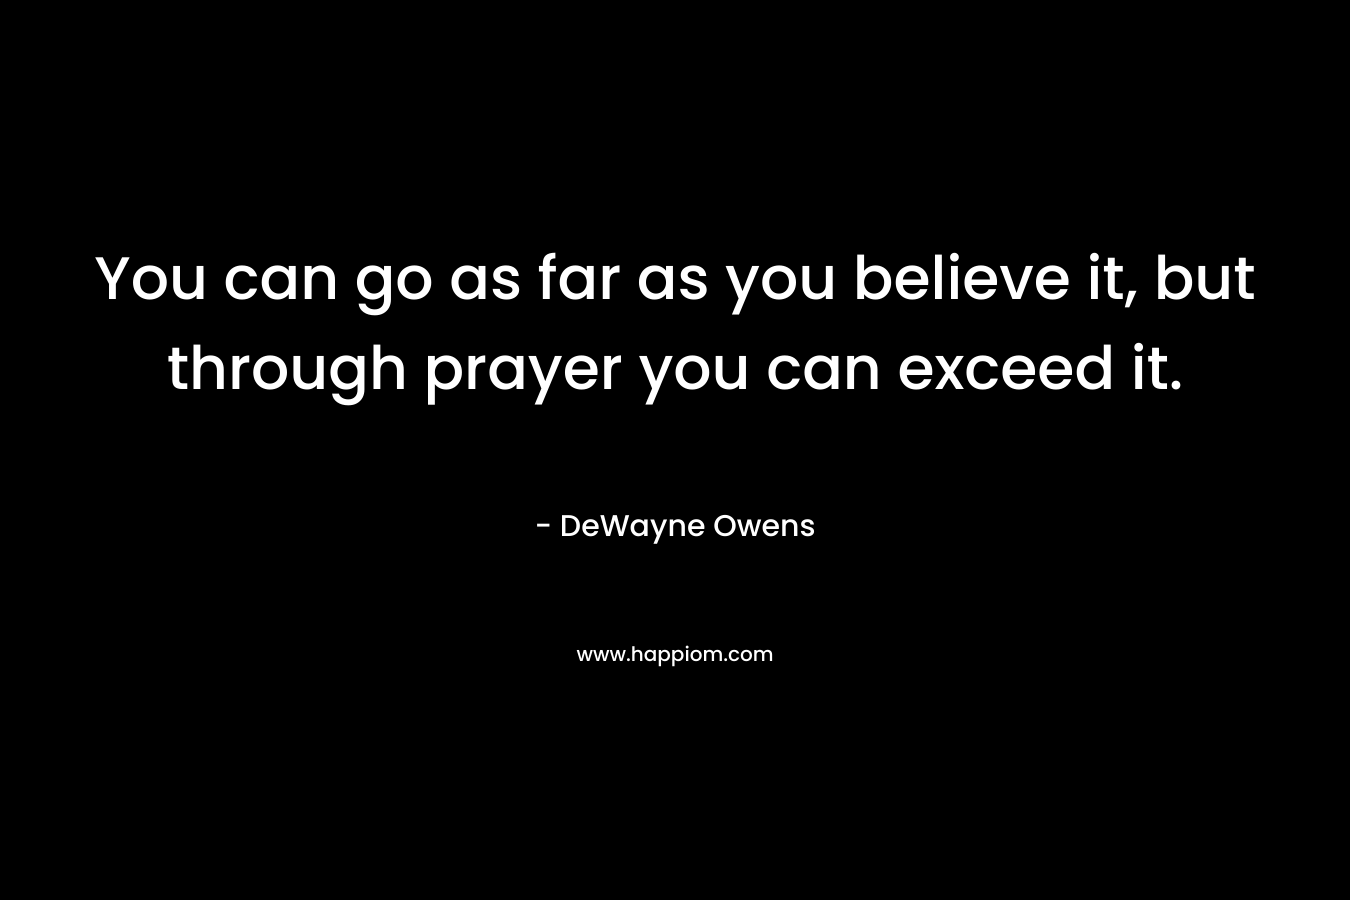 You can go as far as you believe it, but through prayer you can exceed it. – DeWayne Owens